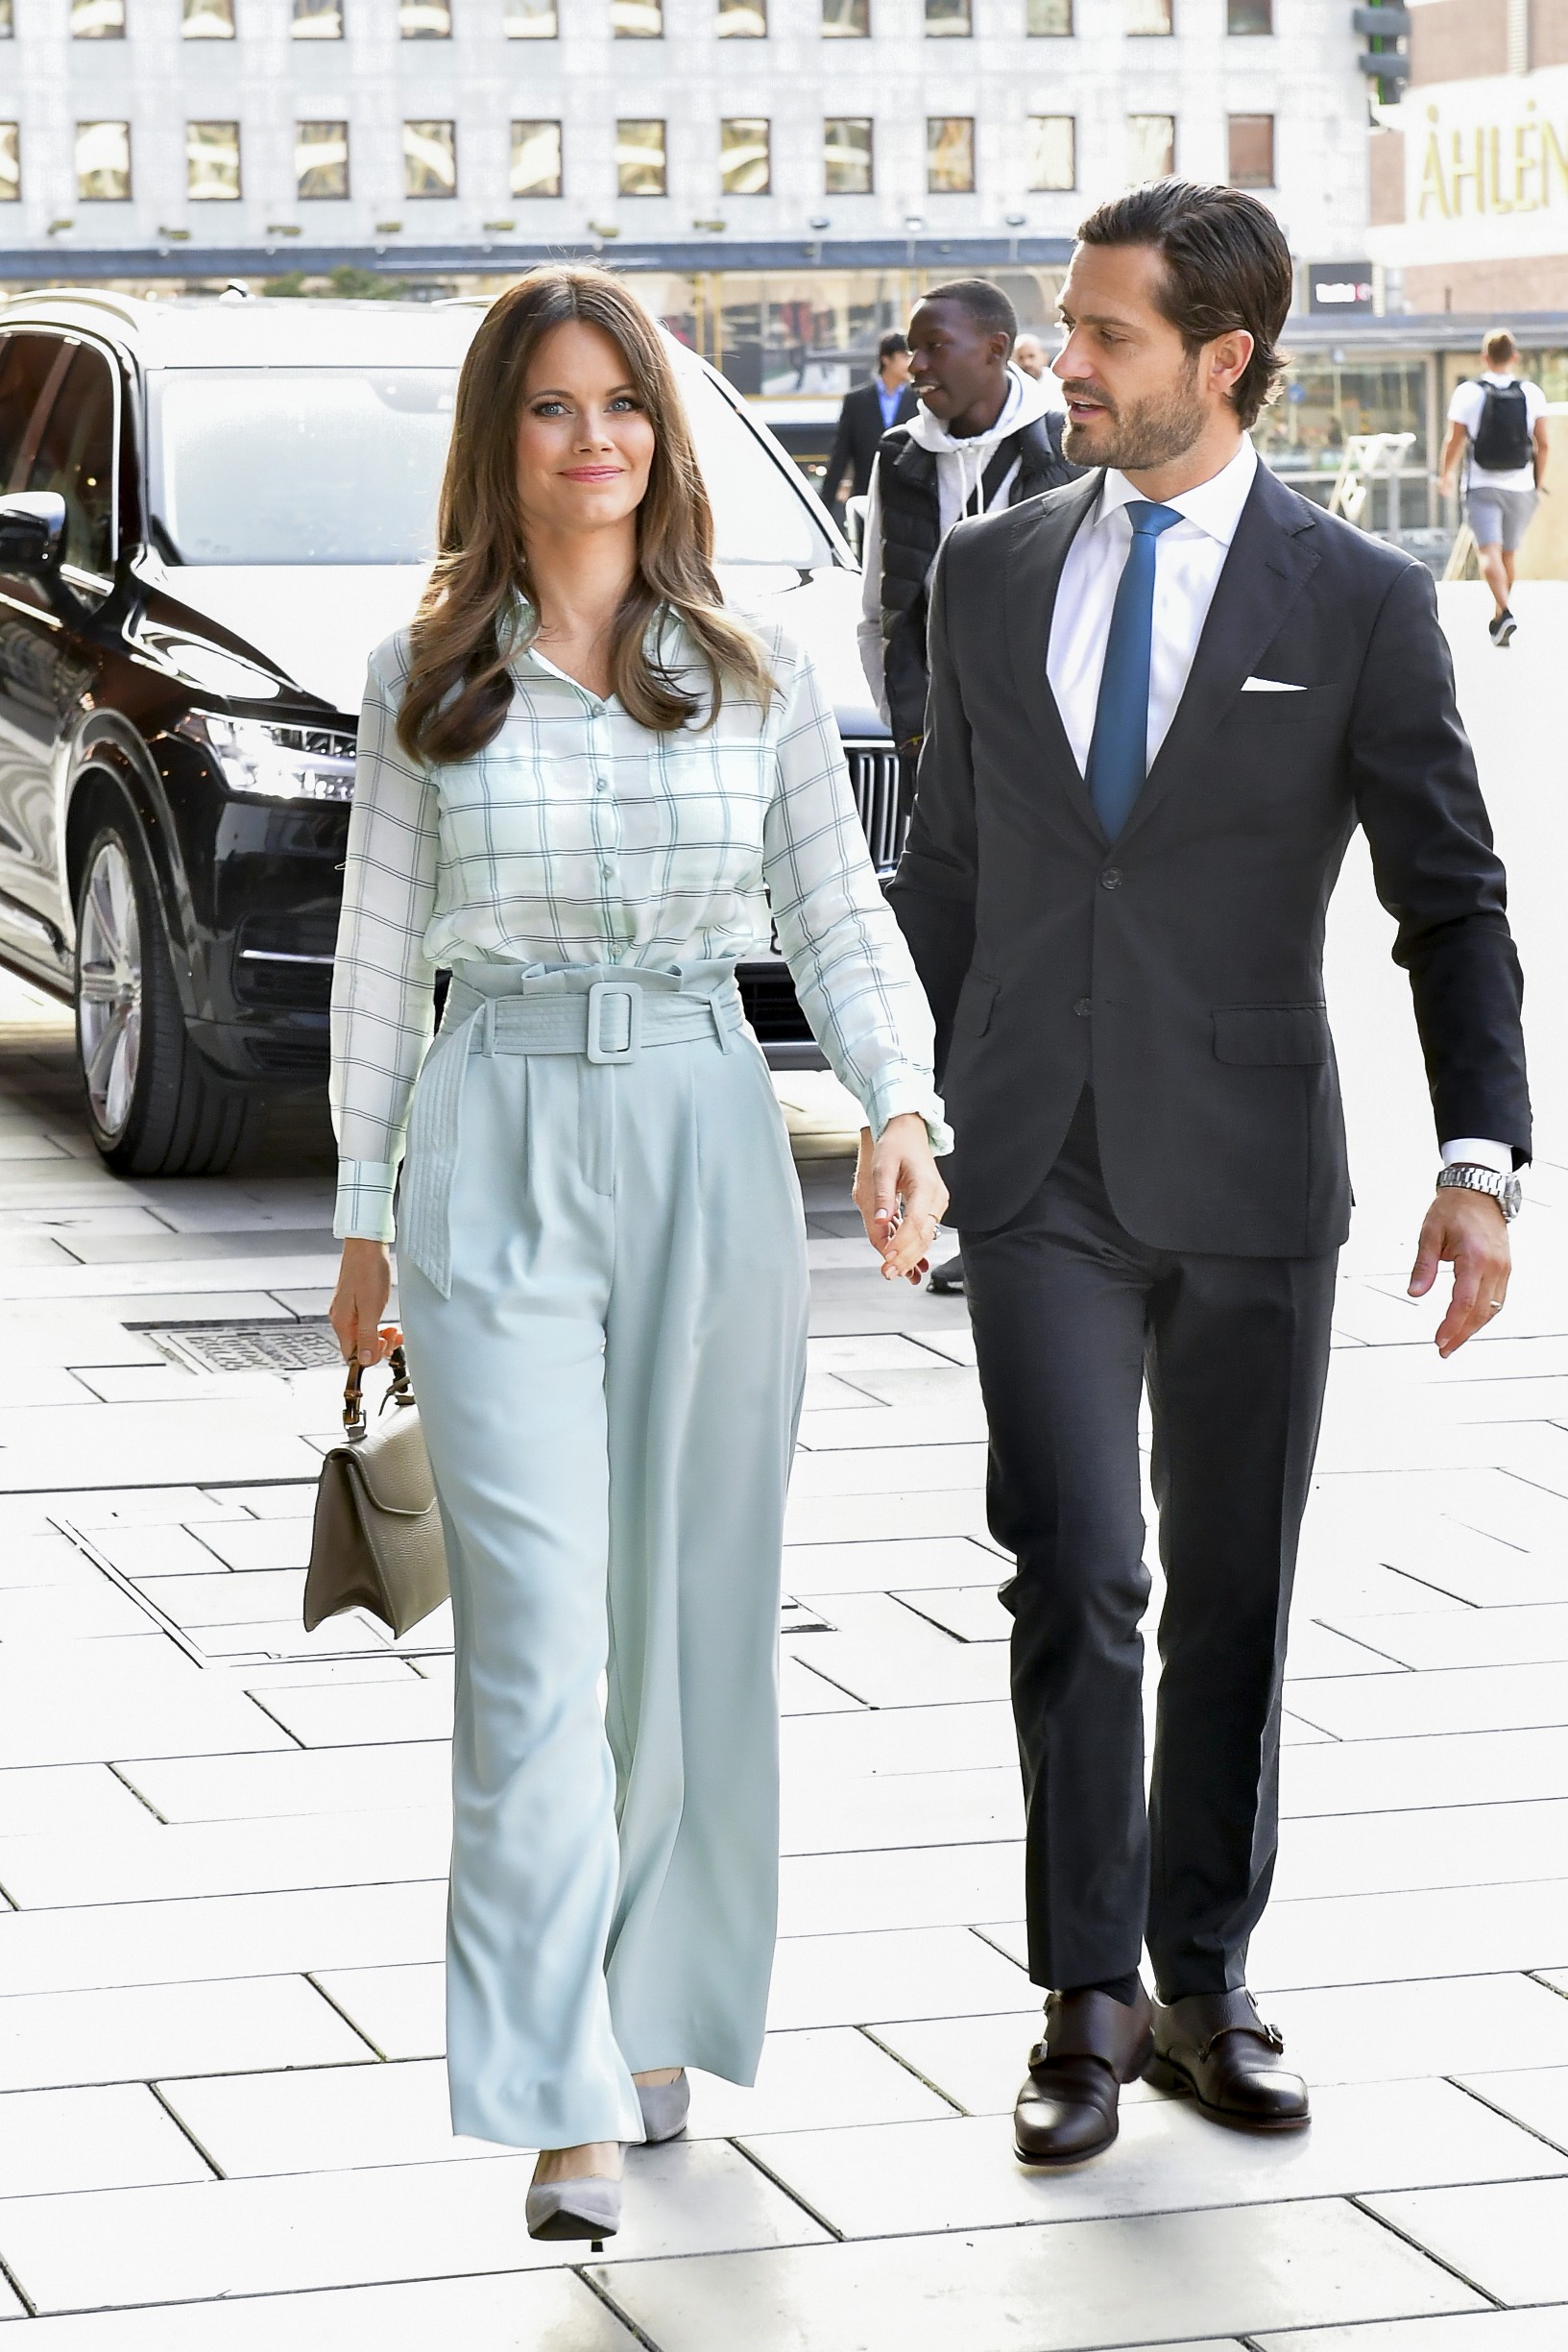 Prince Carl Philip and Princess Sofia arrive for a preview of the theatre performance; 'If I Say Something, it Only Gets Worse....'.
Prince Carl Philip and Princess Sofia arrive for a theatre performance, Kulturhuset Stadsteatern, Stockholm, Sweden - 23 Sep 2020,Image: 559446137, License: Rights-managed, Restrictions: , Model Release: no, Credit line: IBL / Shutterstock Editorial / Profimedia